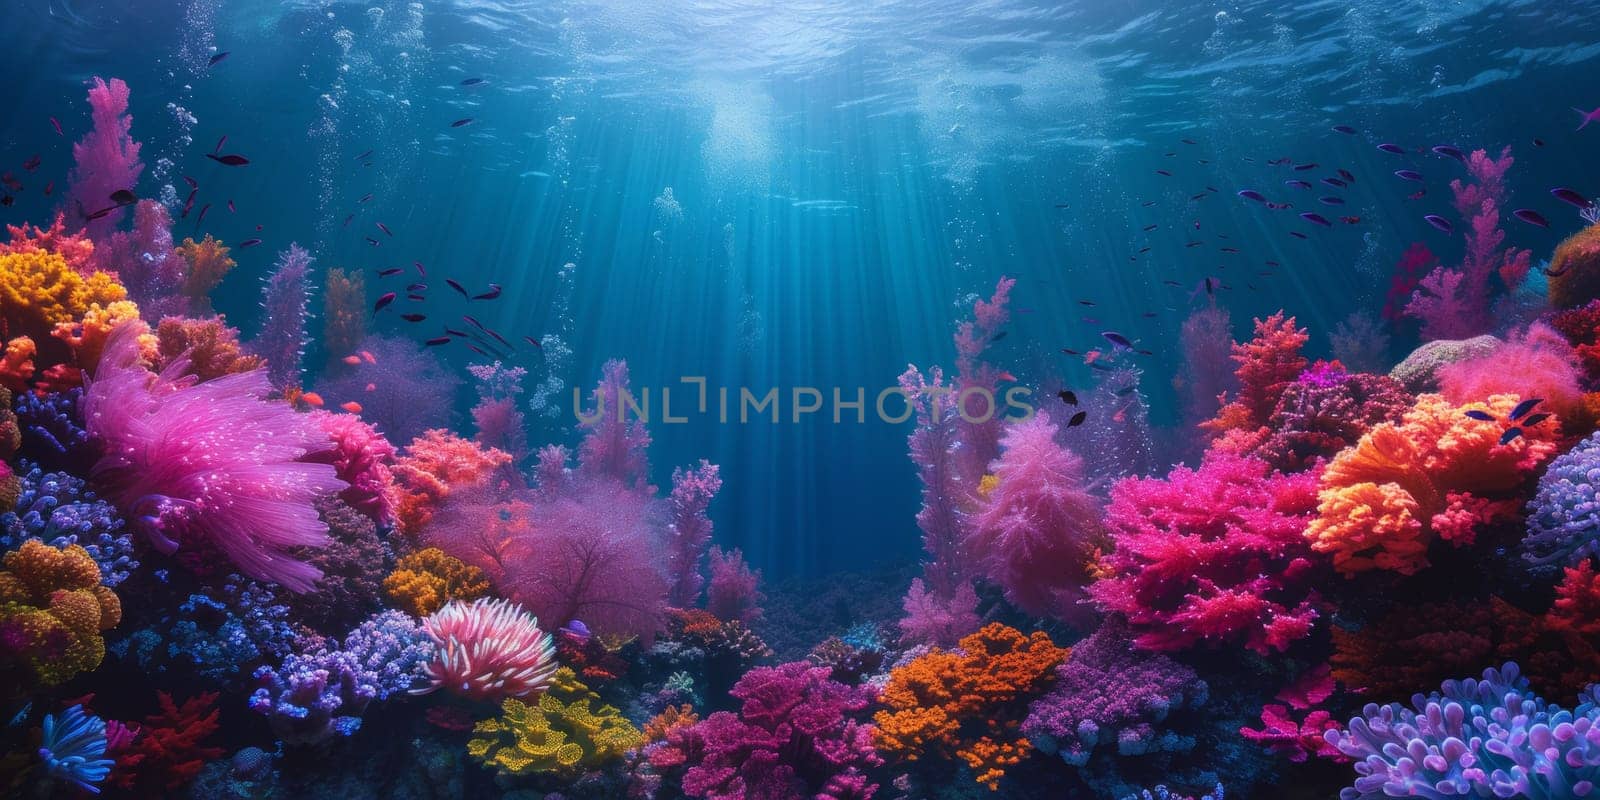 A colorful coral reef with sunlight shining through the water